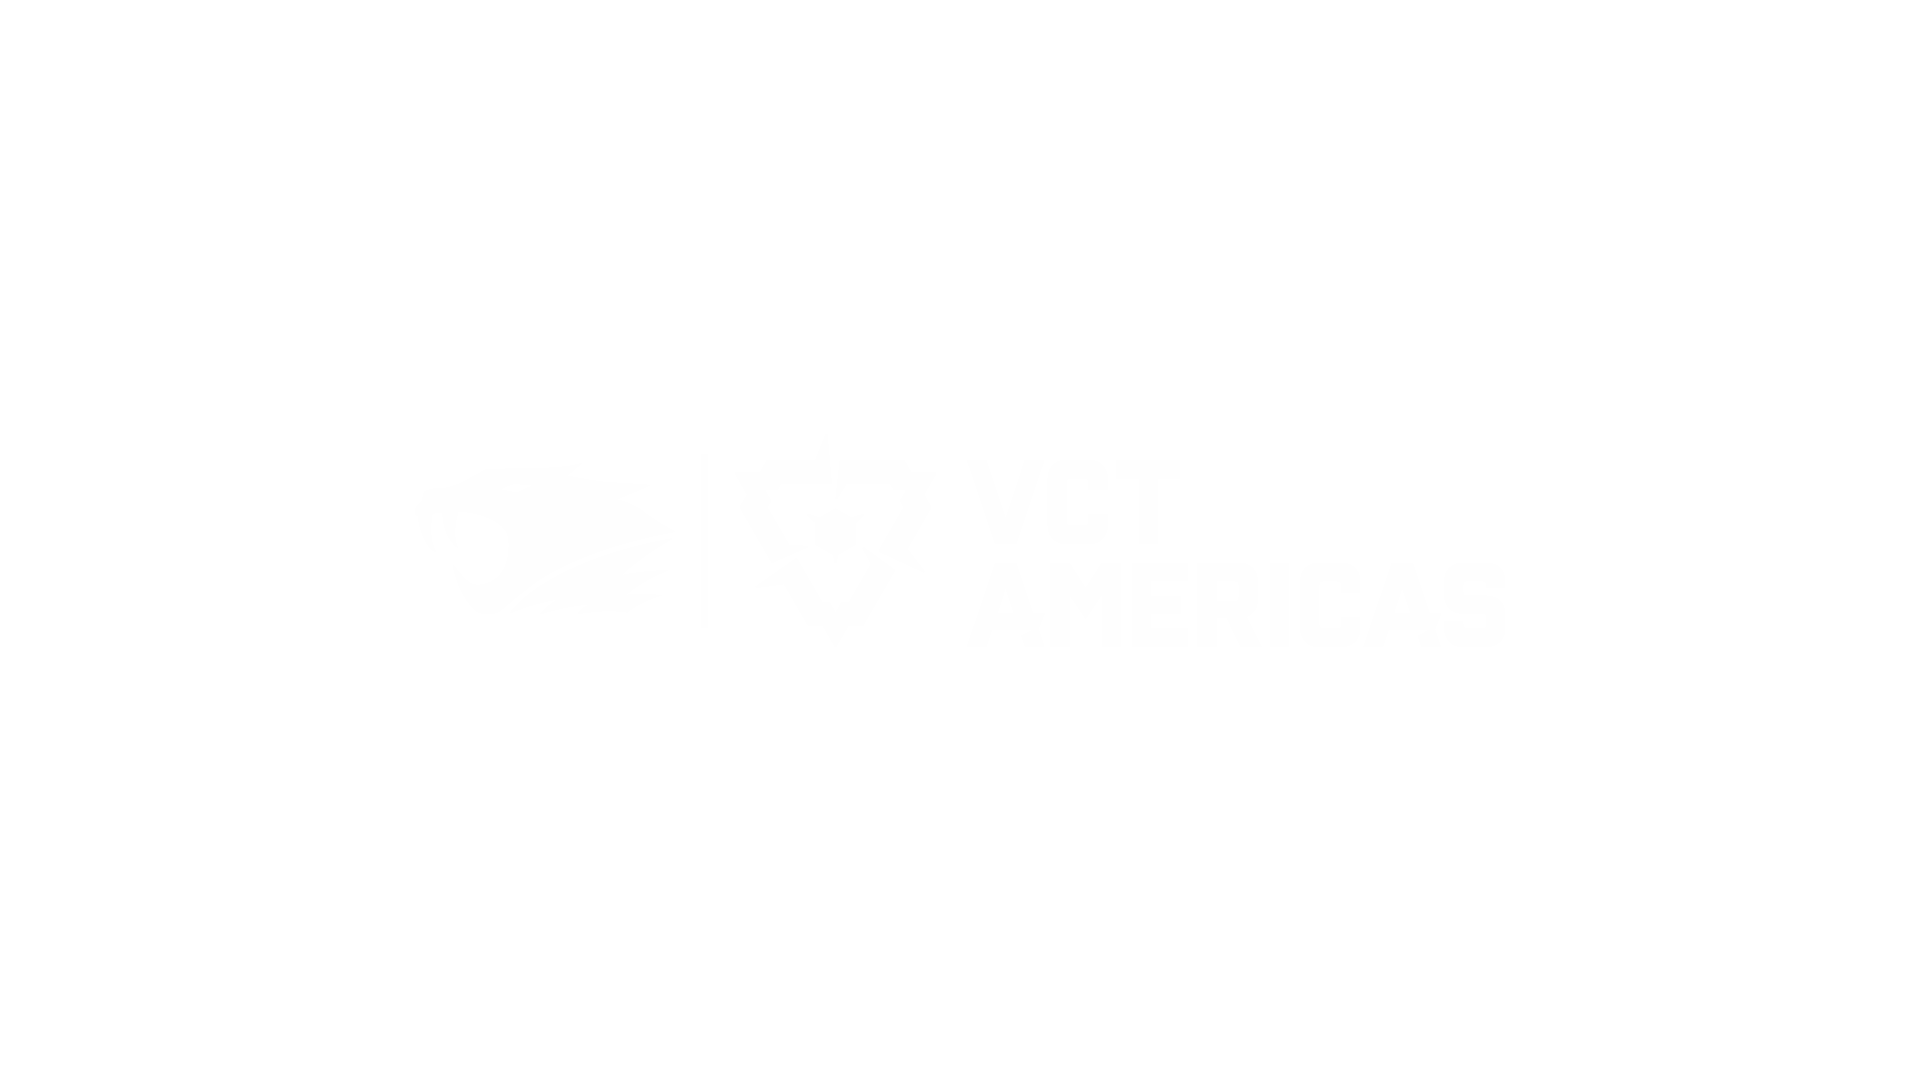 VCT Americas and iBUYPOWER logos